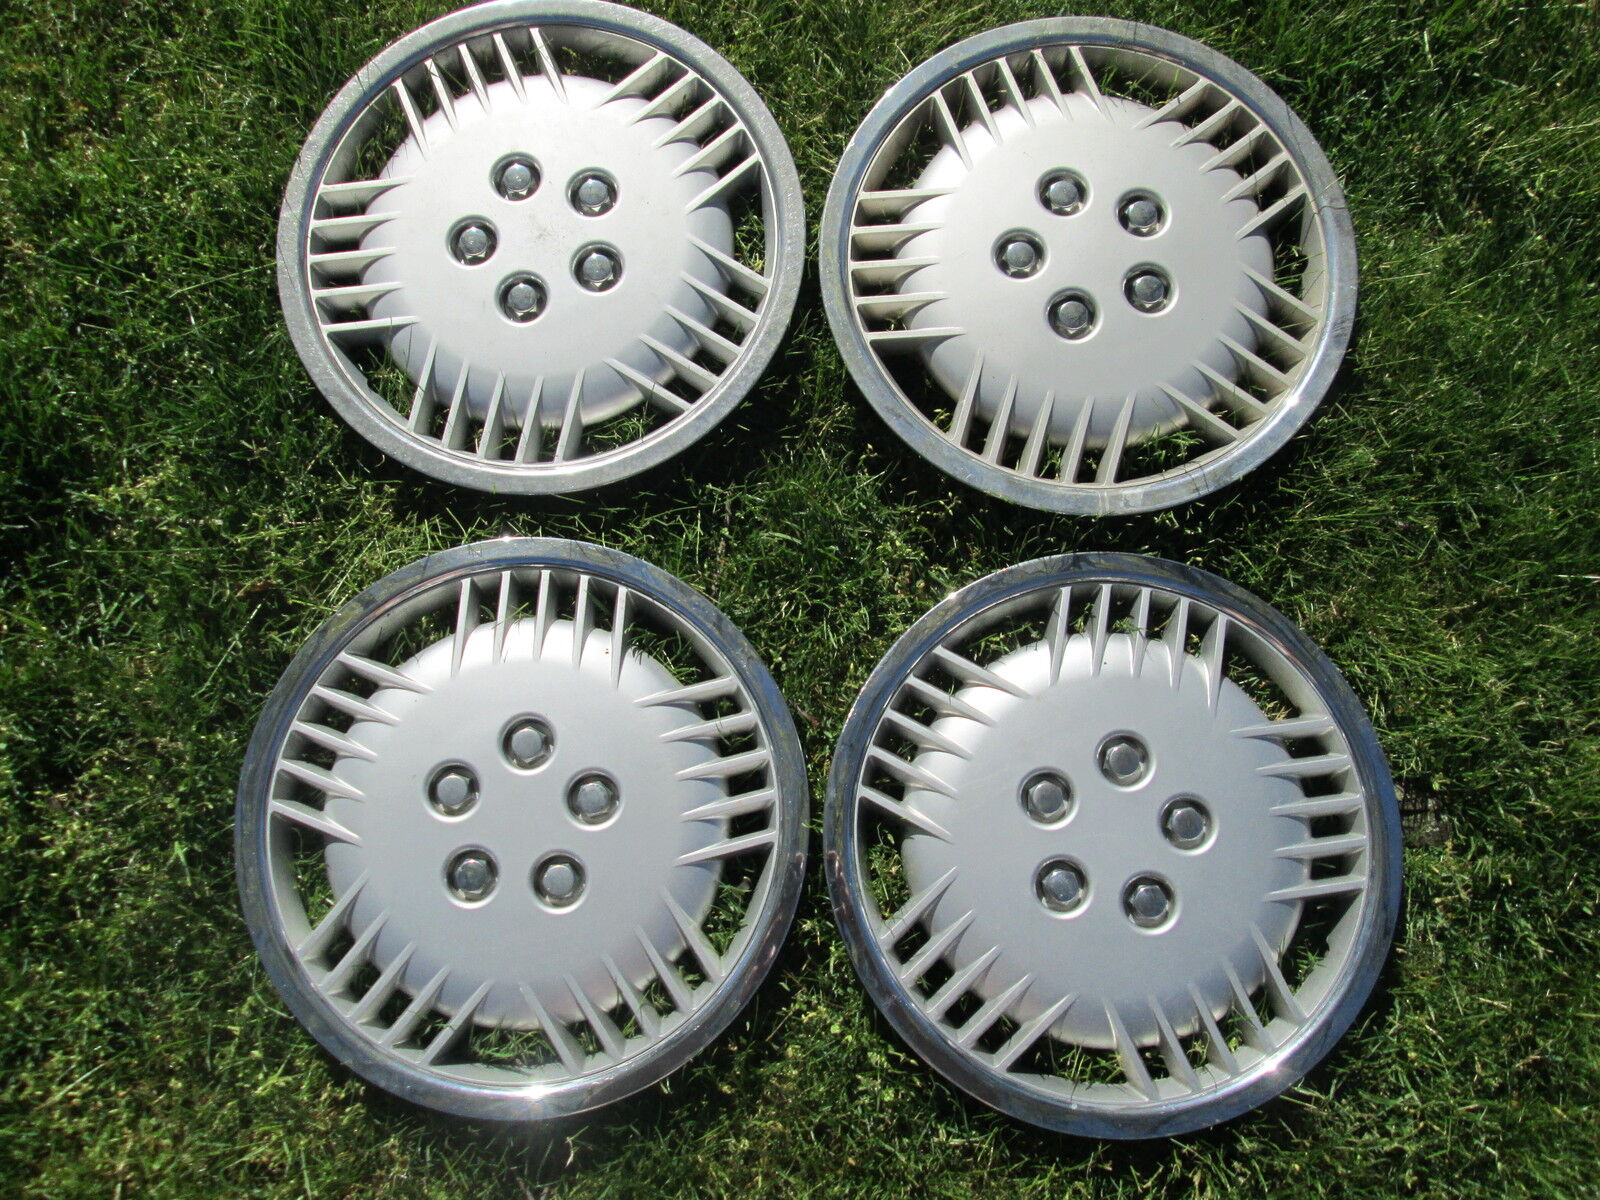 Chrysler Plymouth Dodge Spirit 14 inch factory mag style hubcaps wheel covers